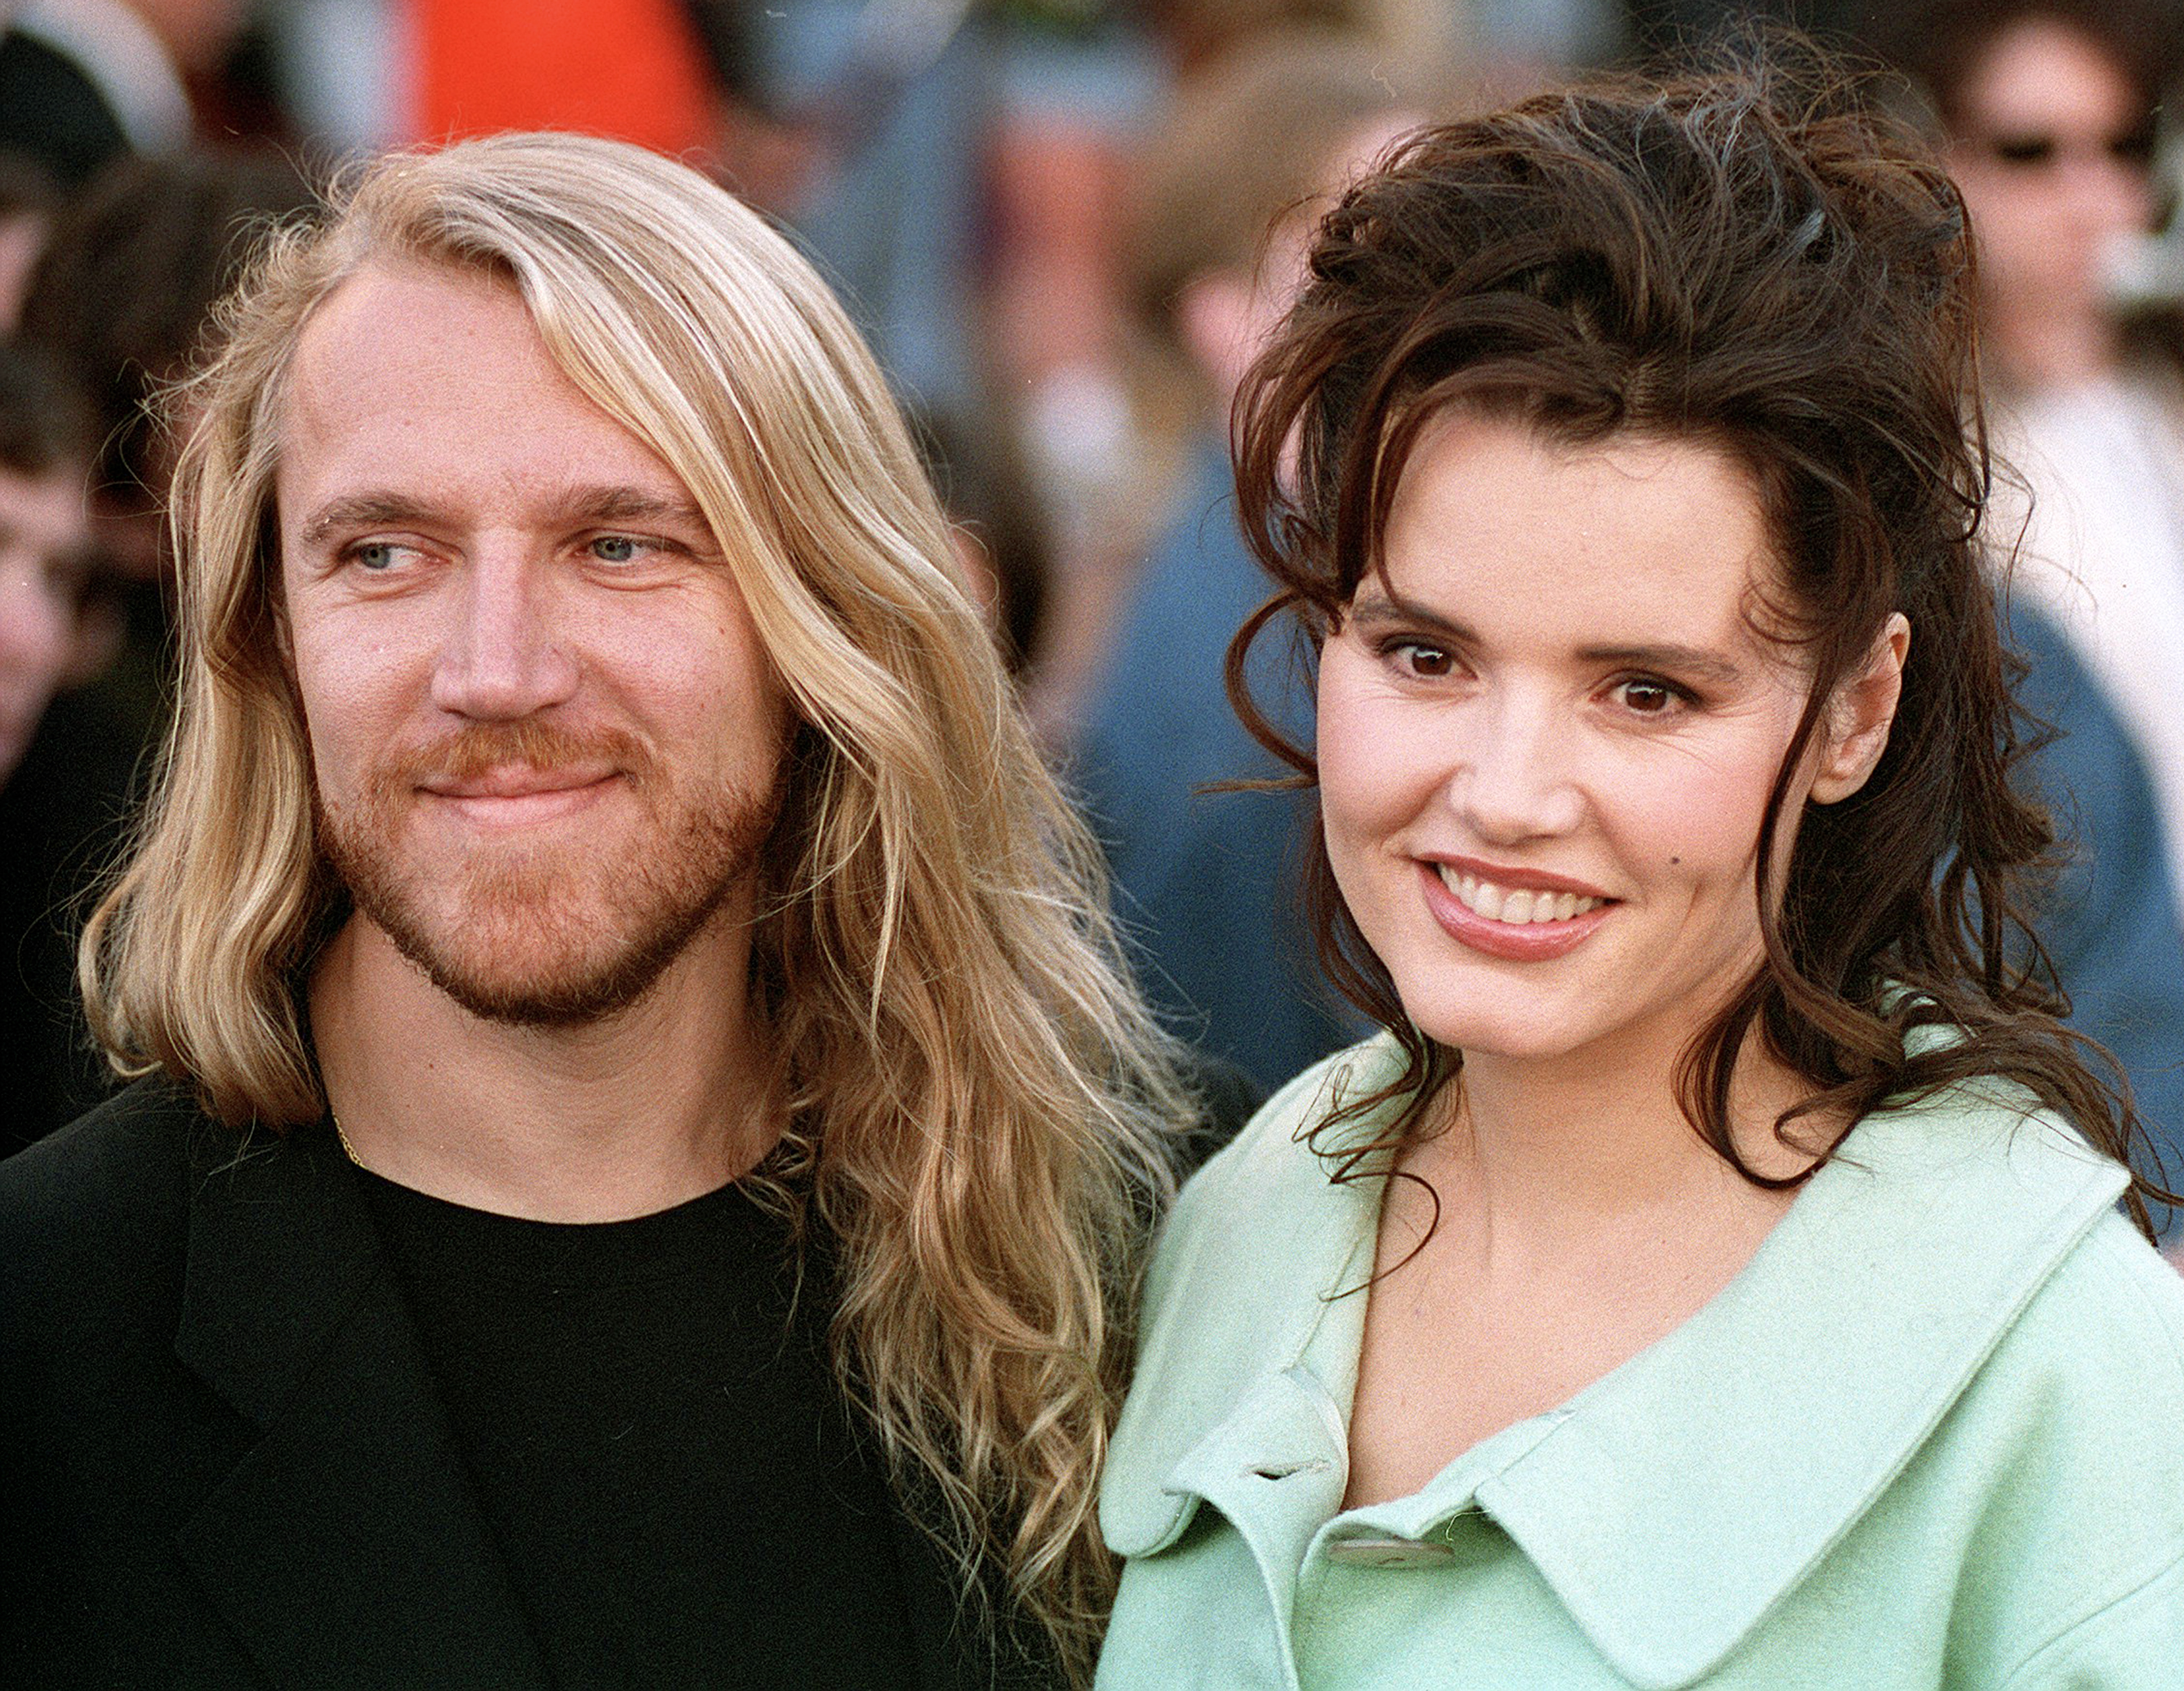 Renny Harlin and Geena Davis at the "Batman Forever" premiere in California, 1995 | Source: Getty Images